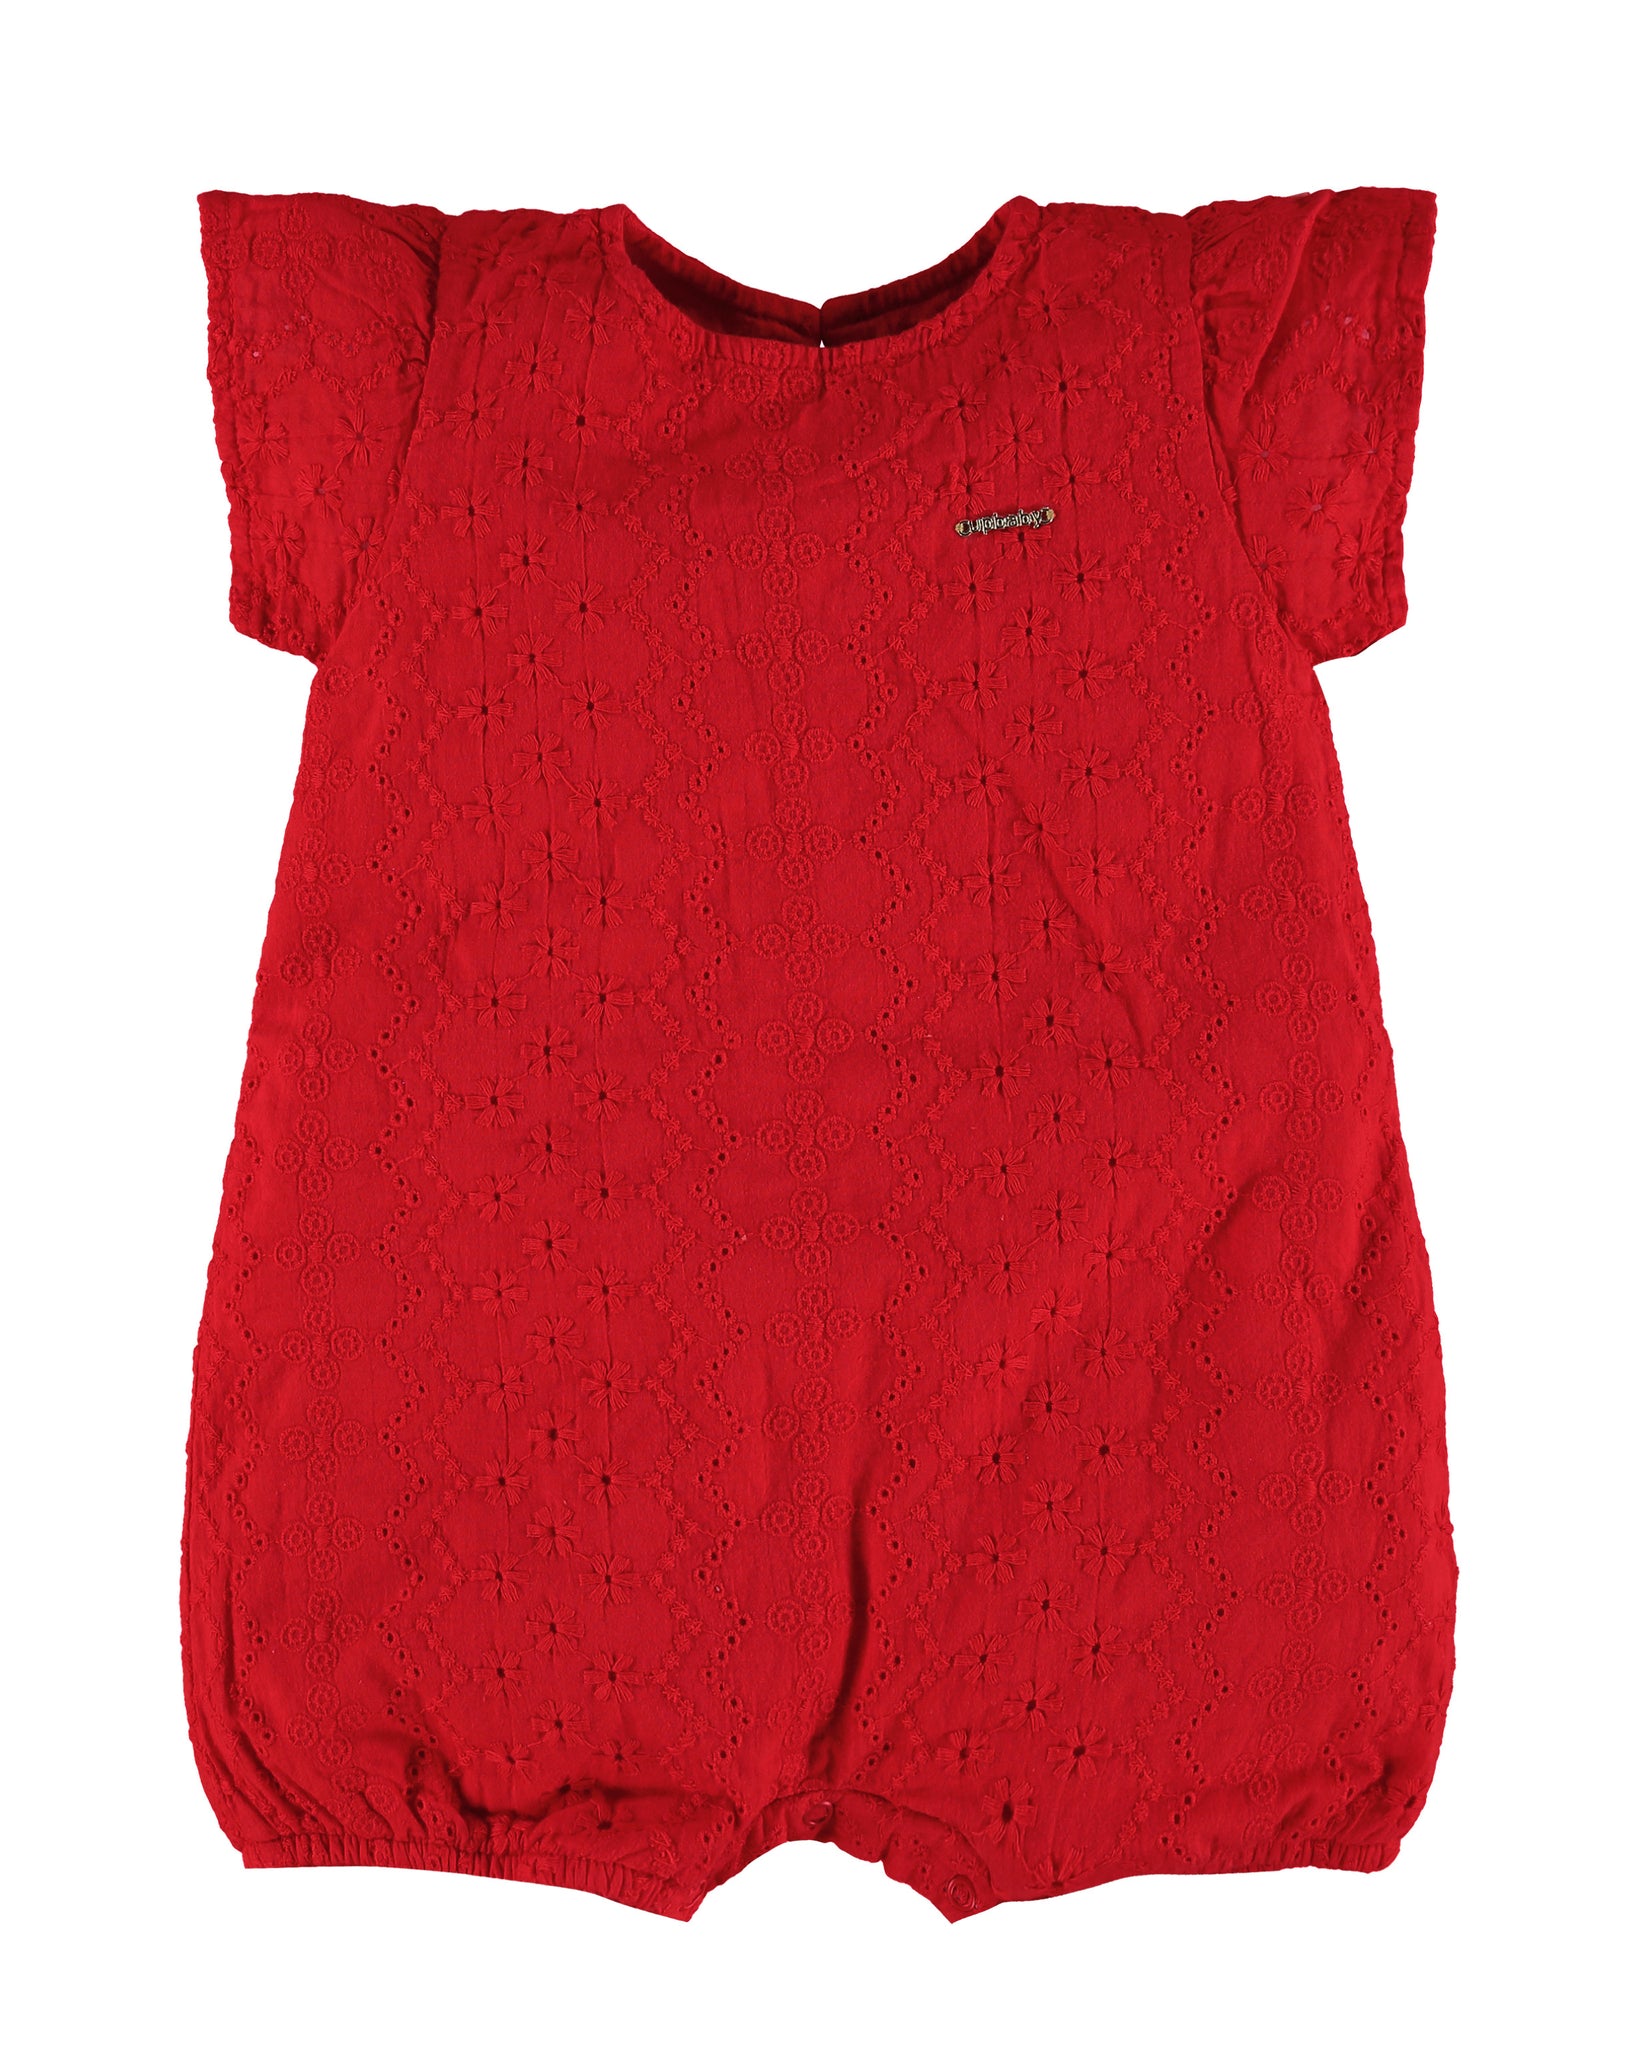 Red Eyelet Bubble Romper